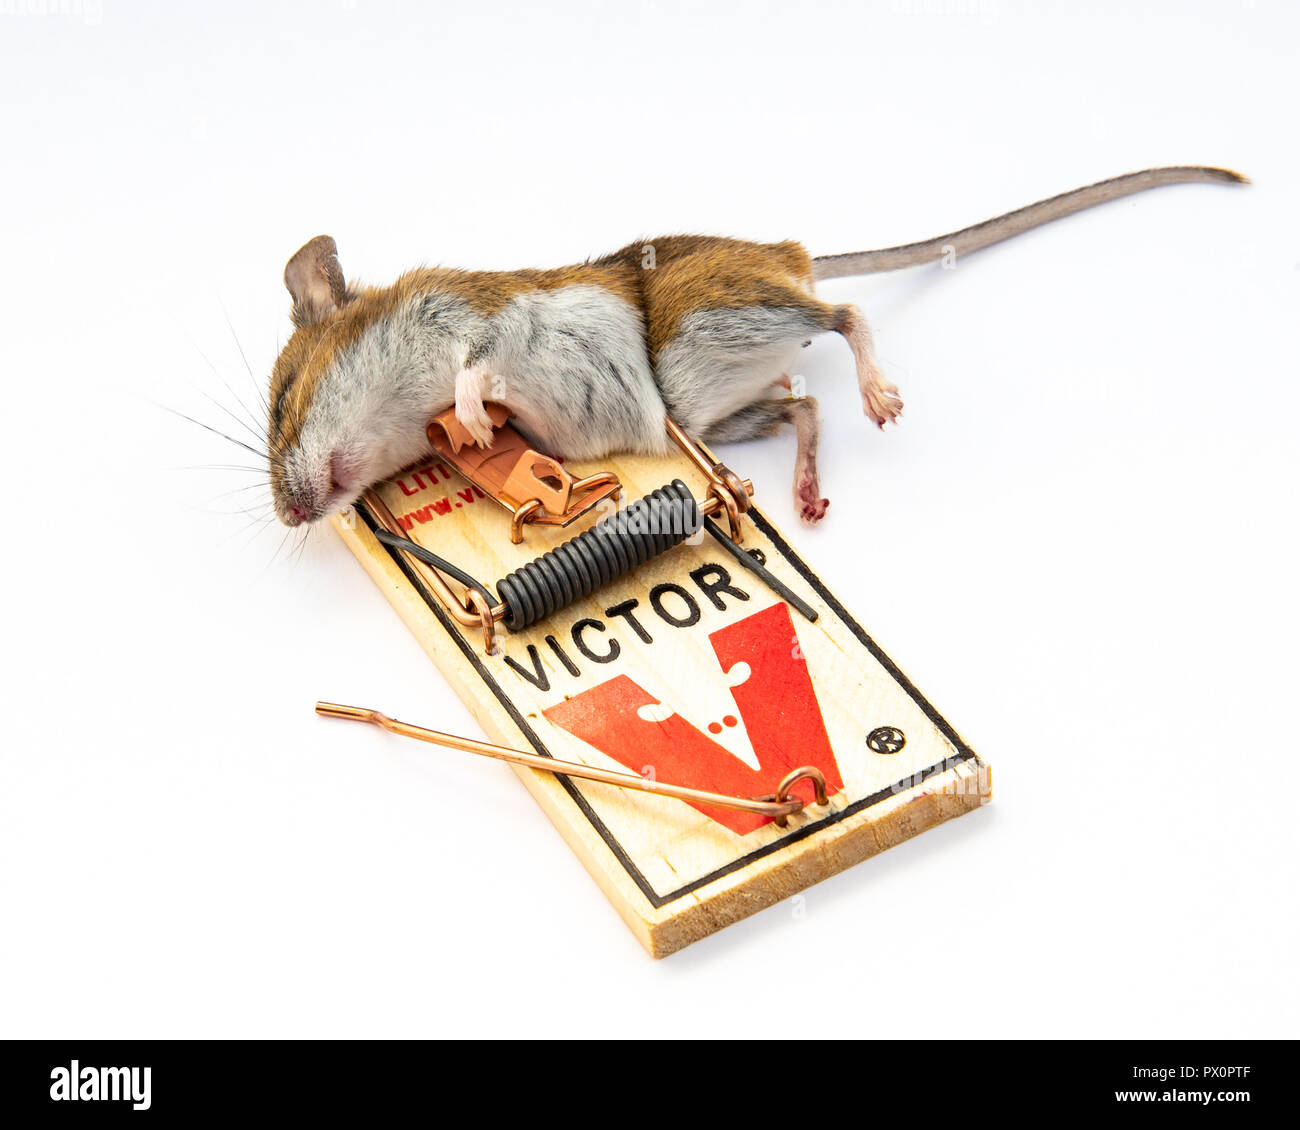 Dead mouse caught in Victor mouse trap. Stock Photo